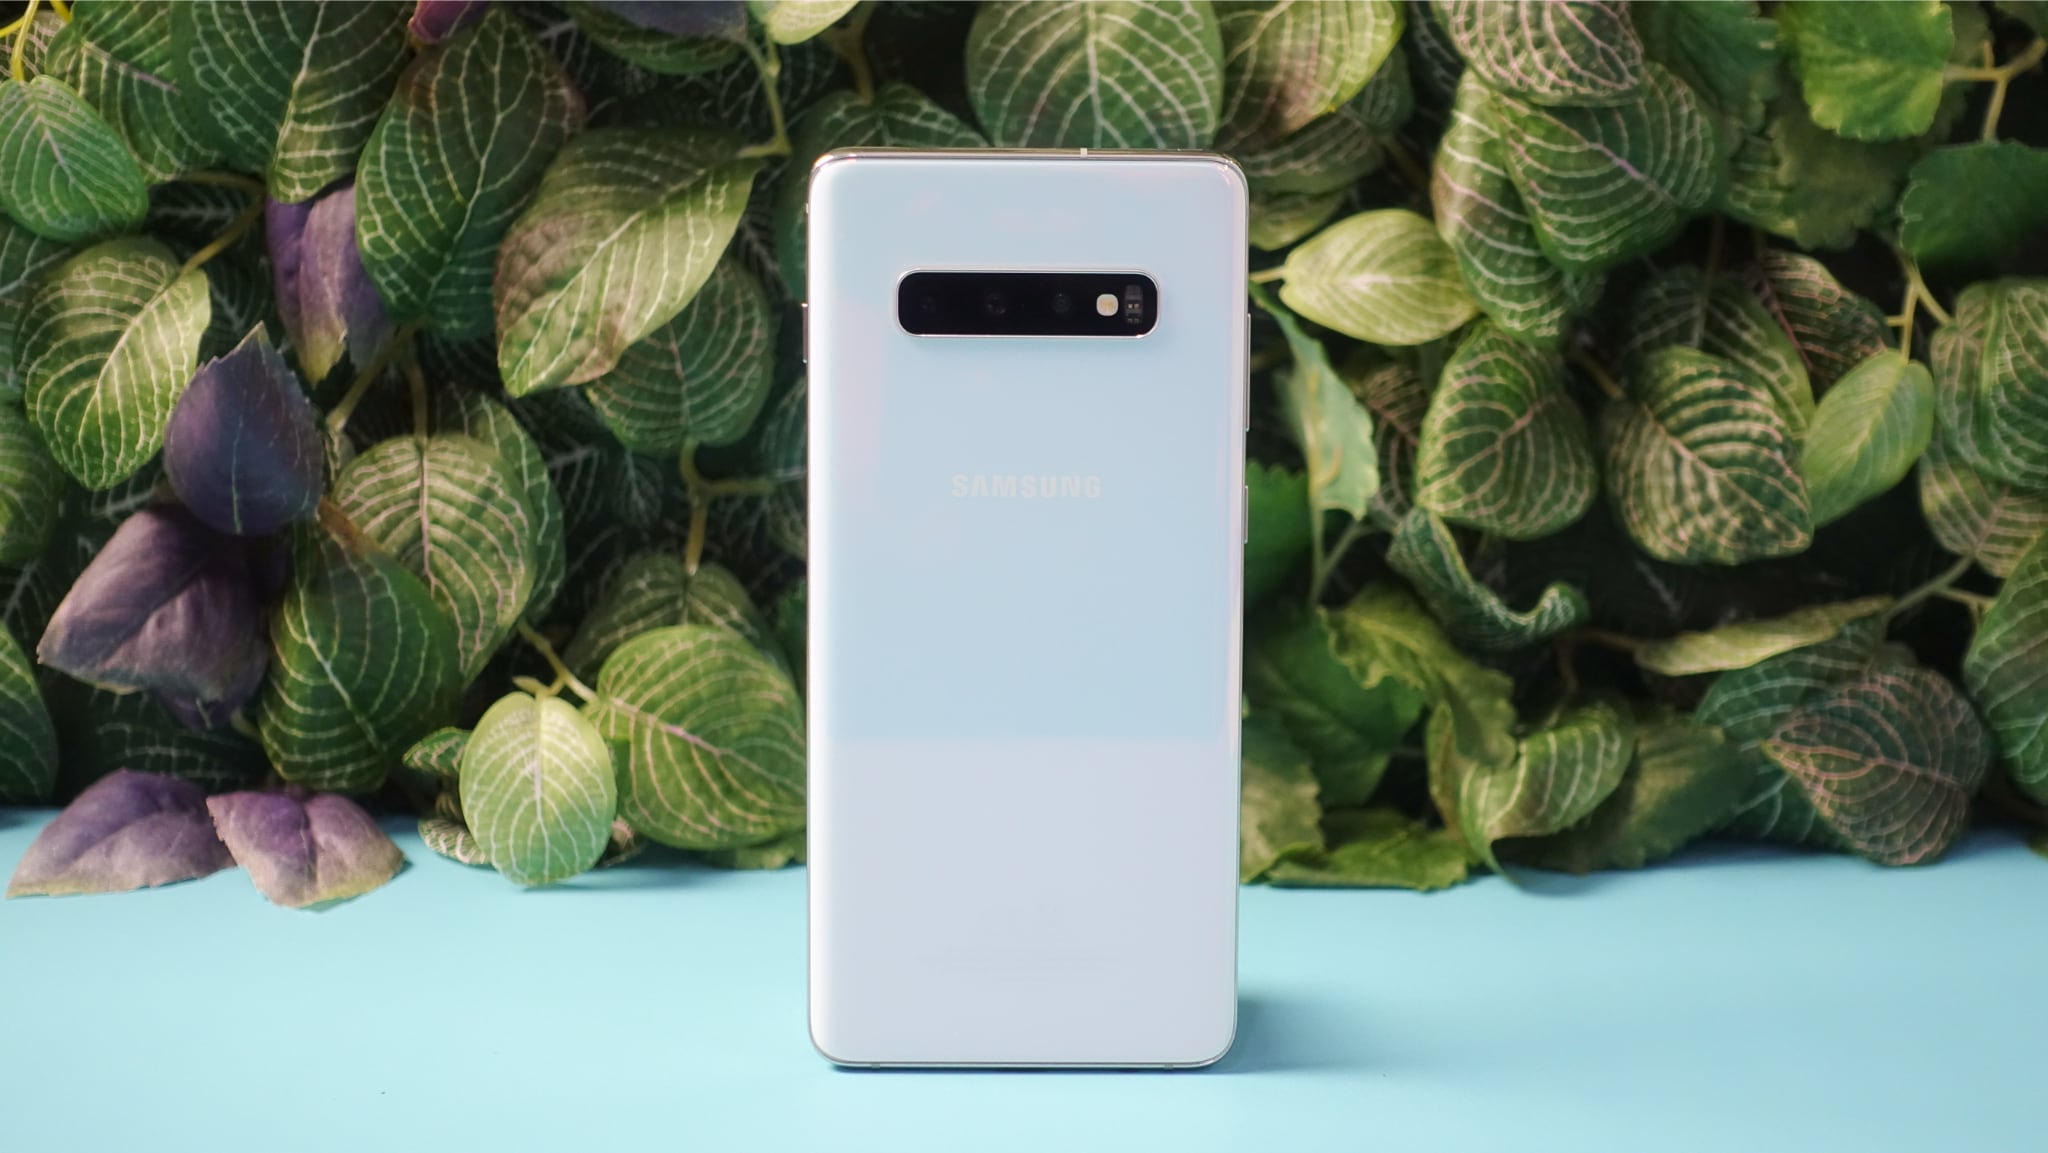 A Samsung Galaxy S10 Plus in white, from the back, with foliage behind it